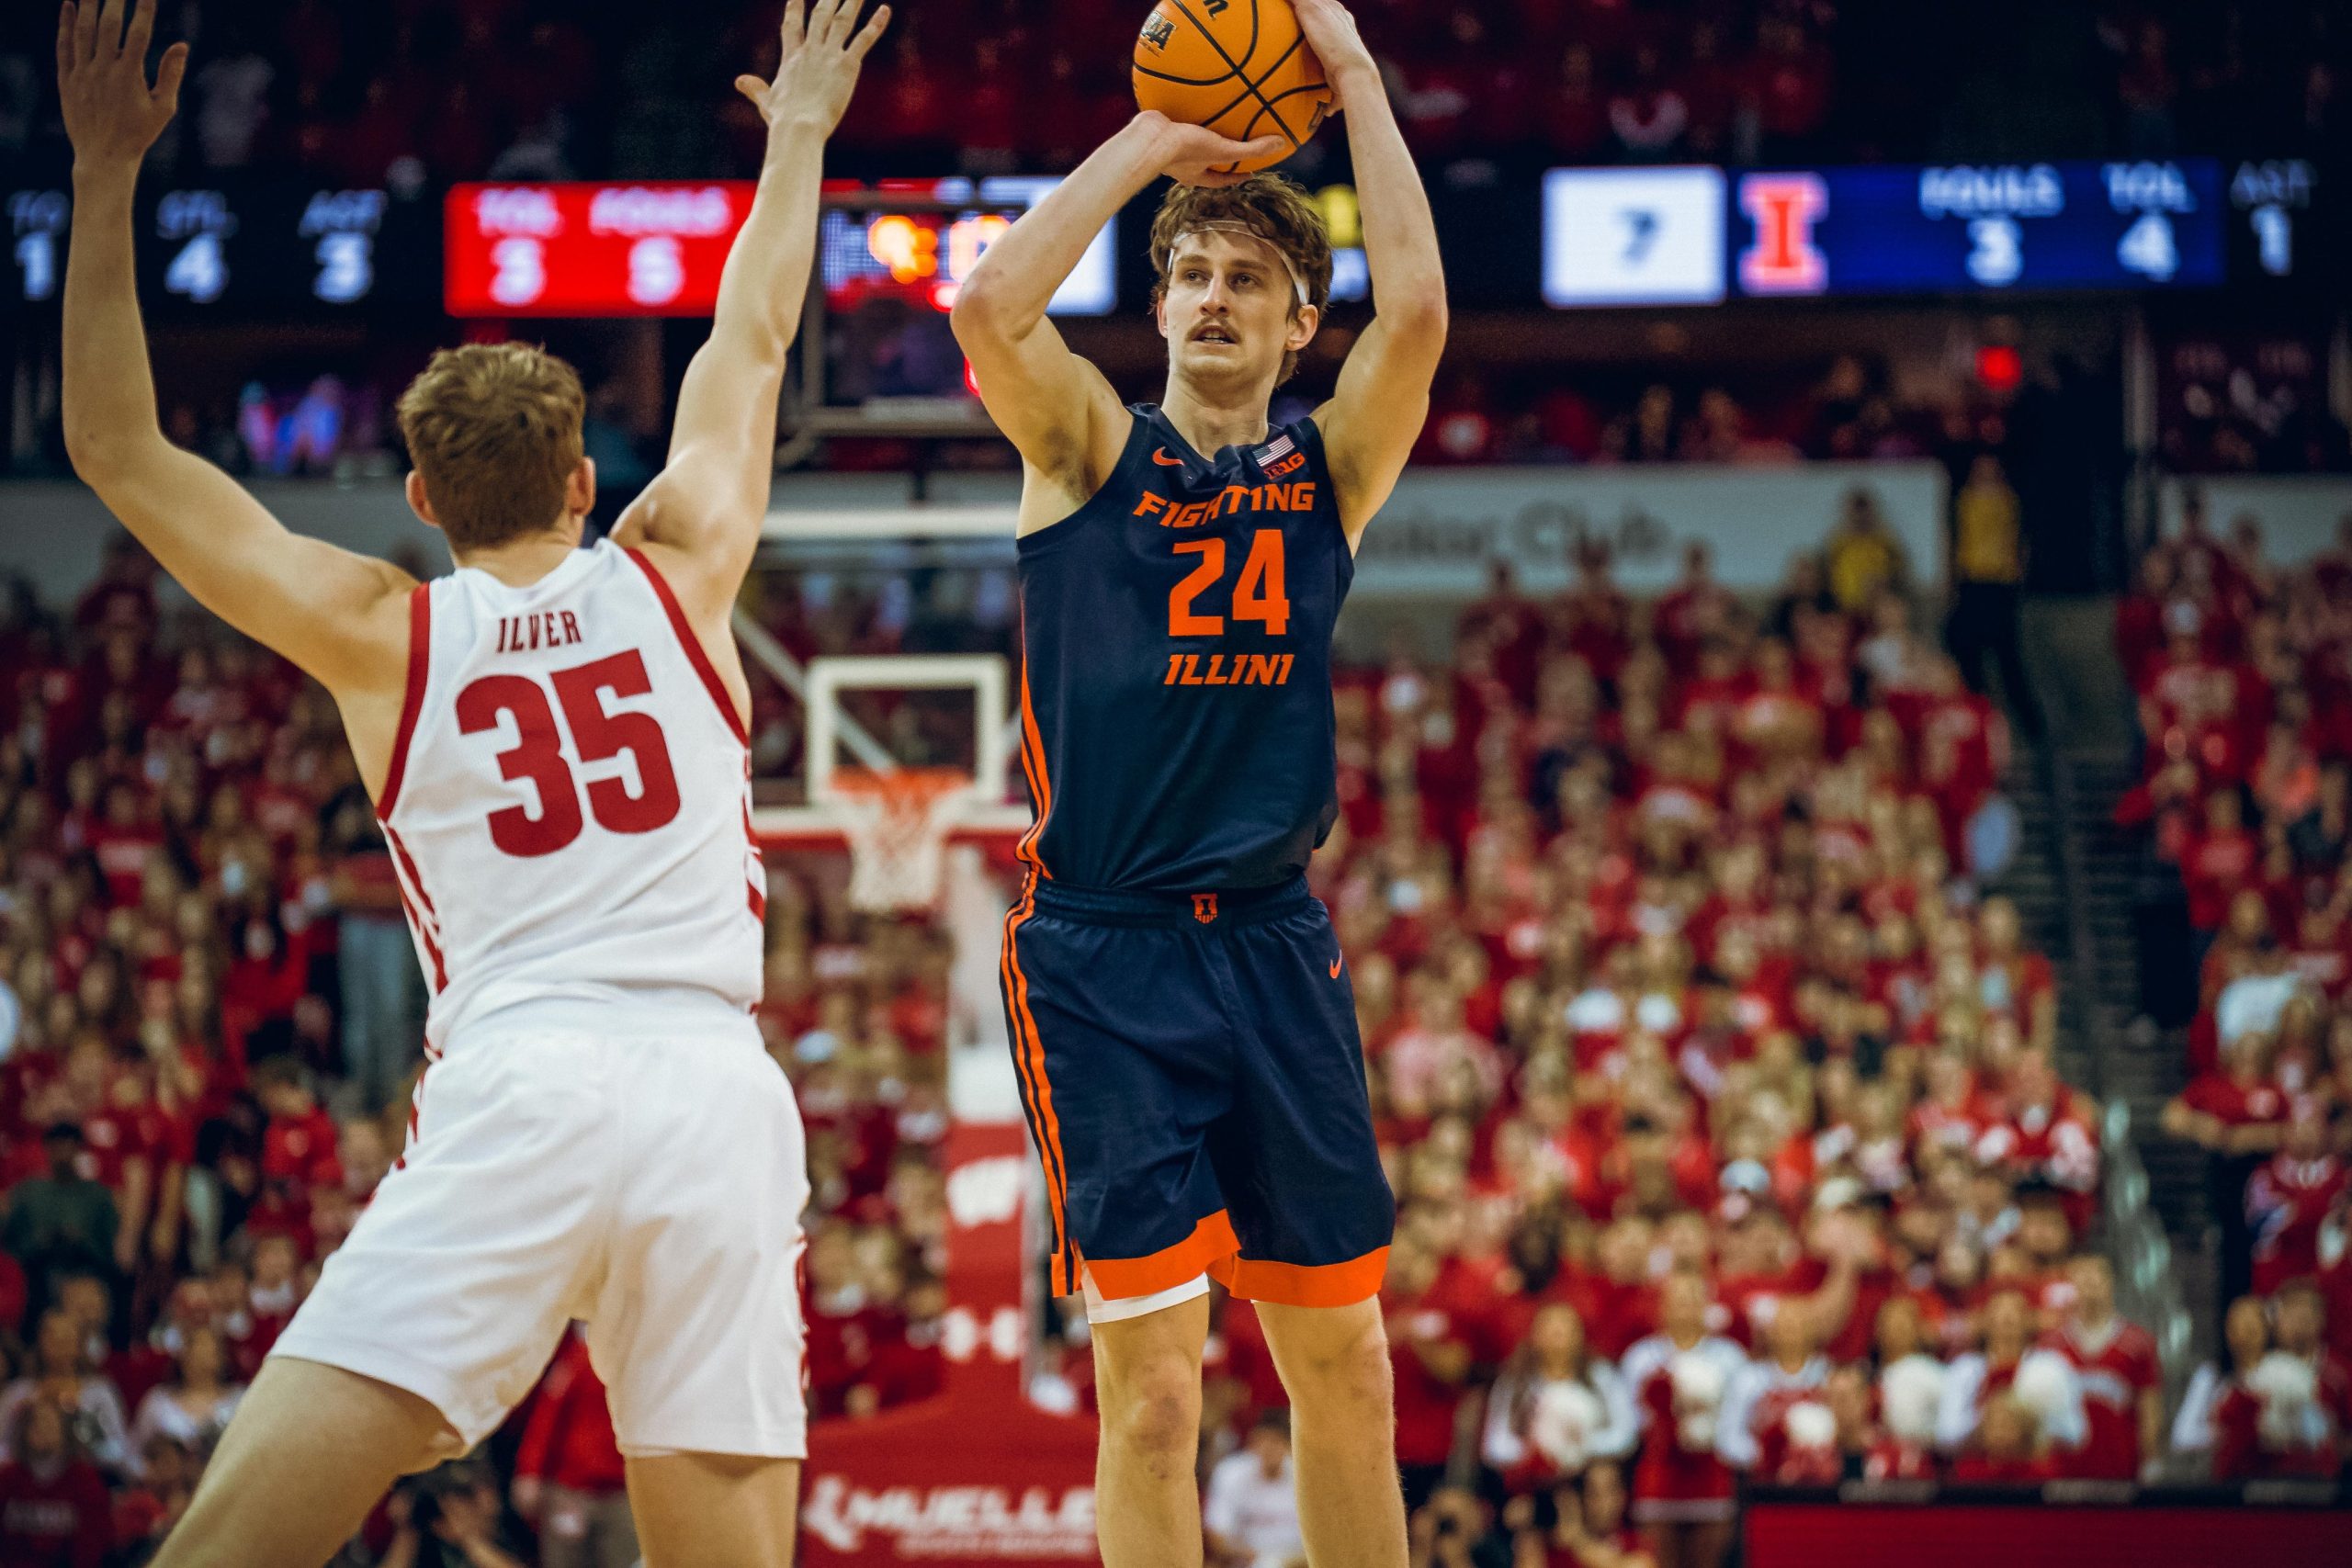 Mayer's Career-High 26 Points Lifts Illini To Season Sweep of Badgers